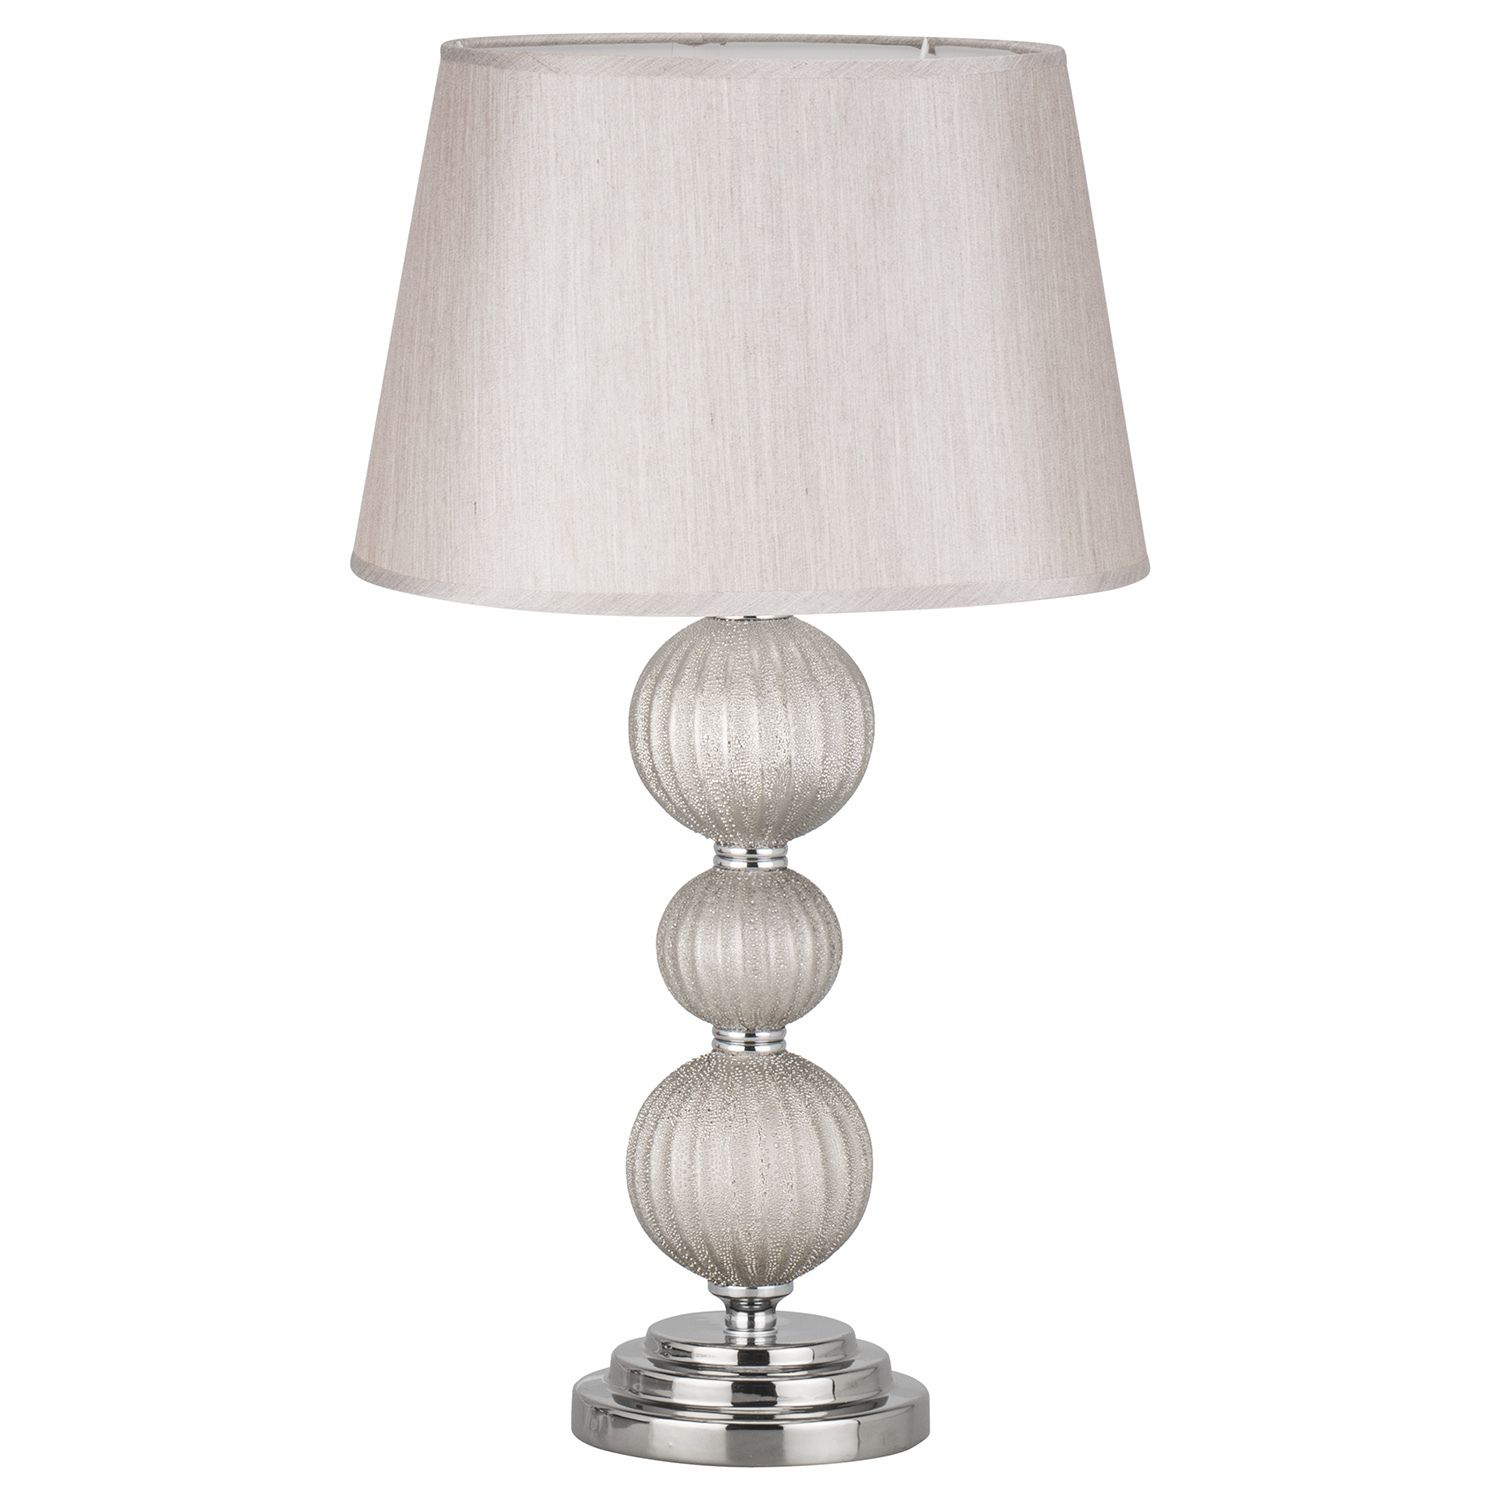 Mink Three Ball Table Lamp Our Bedroom Table Lamp inside sizing 1500 X 1500